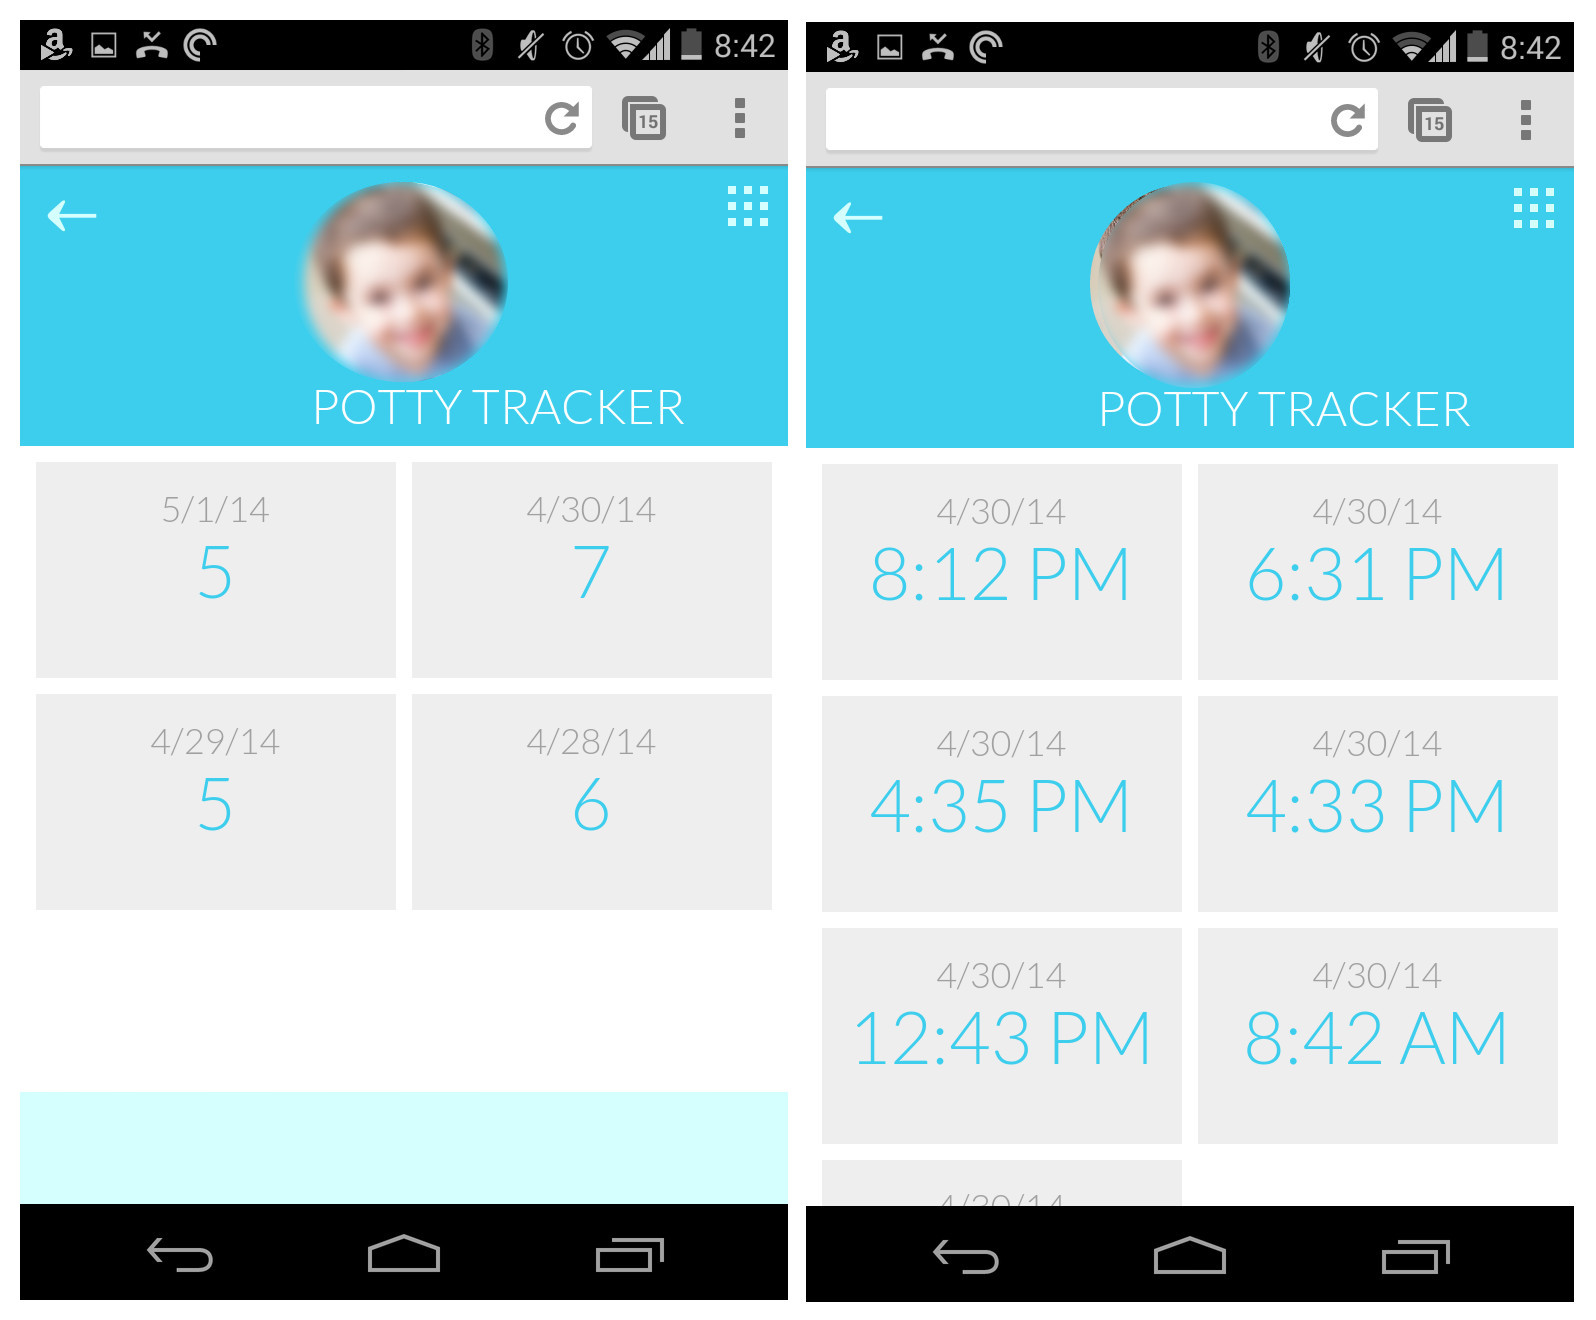 overview and detail screens of potty tracking app